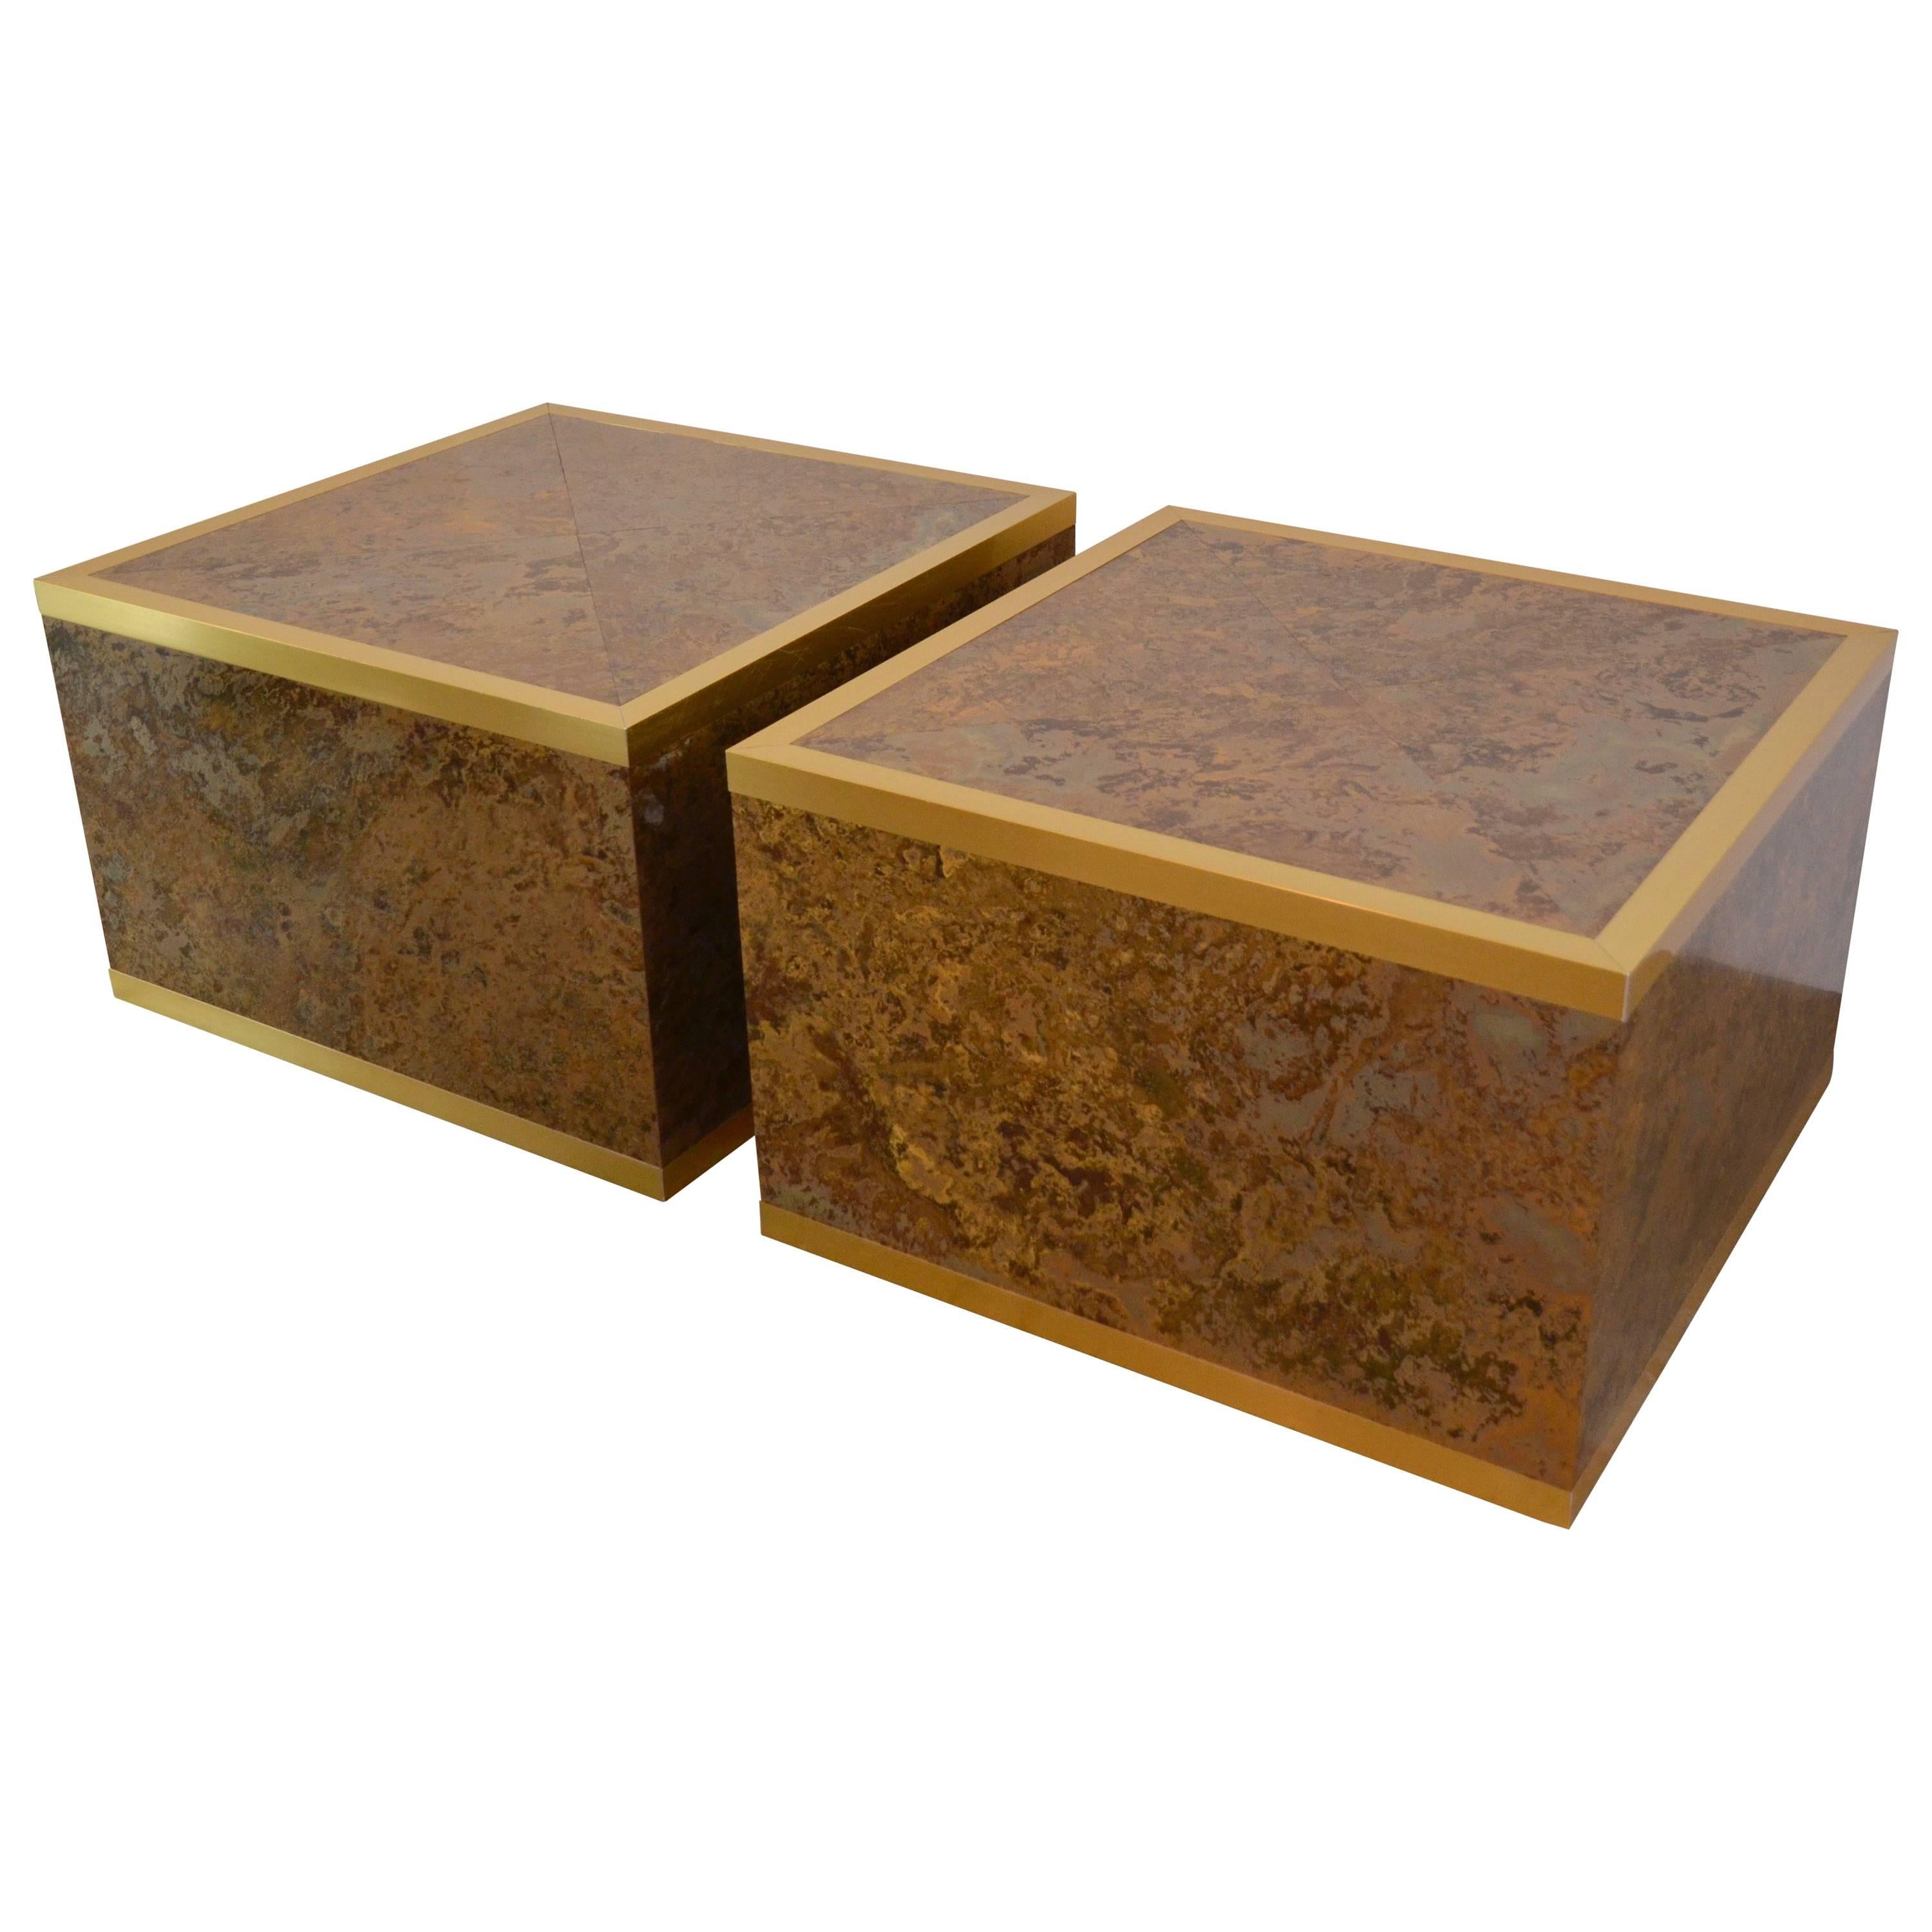 Faux Tortoise Shell and Brass Cube Tables by Lane